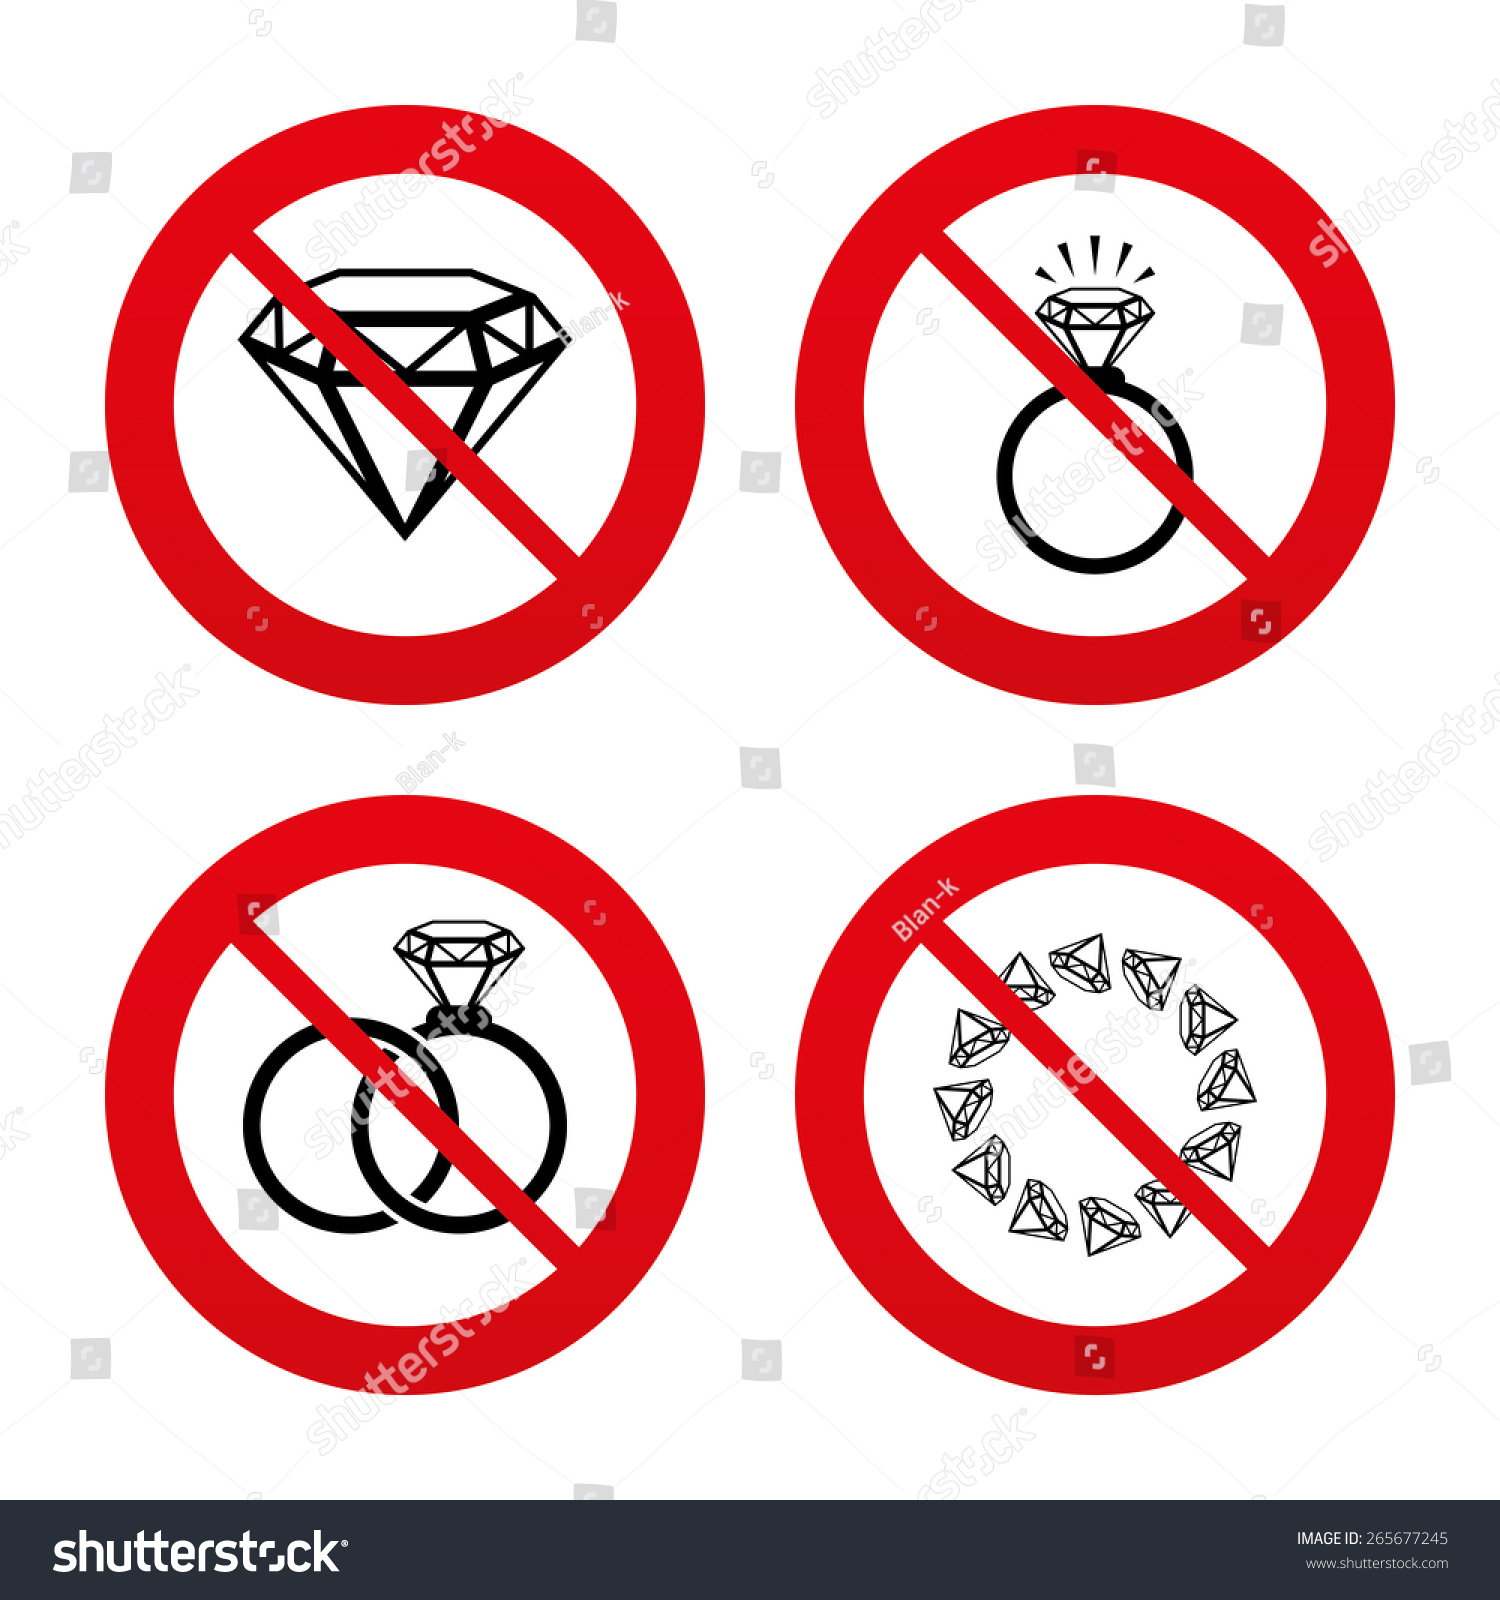 stock-vector-no-ban-or-stop-signs-rings-icons-jewelry-with-shine-diamond-signs-wedding-or-engagement-symbols-265677245.jpg